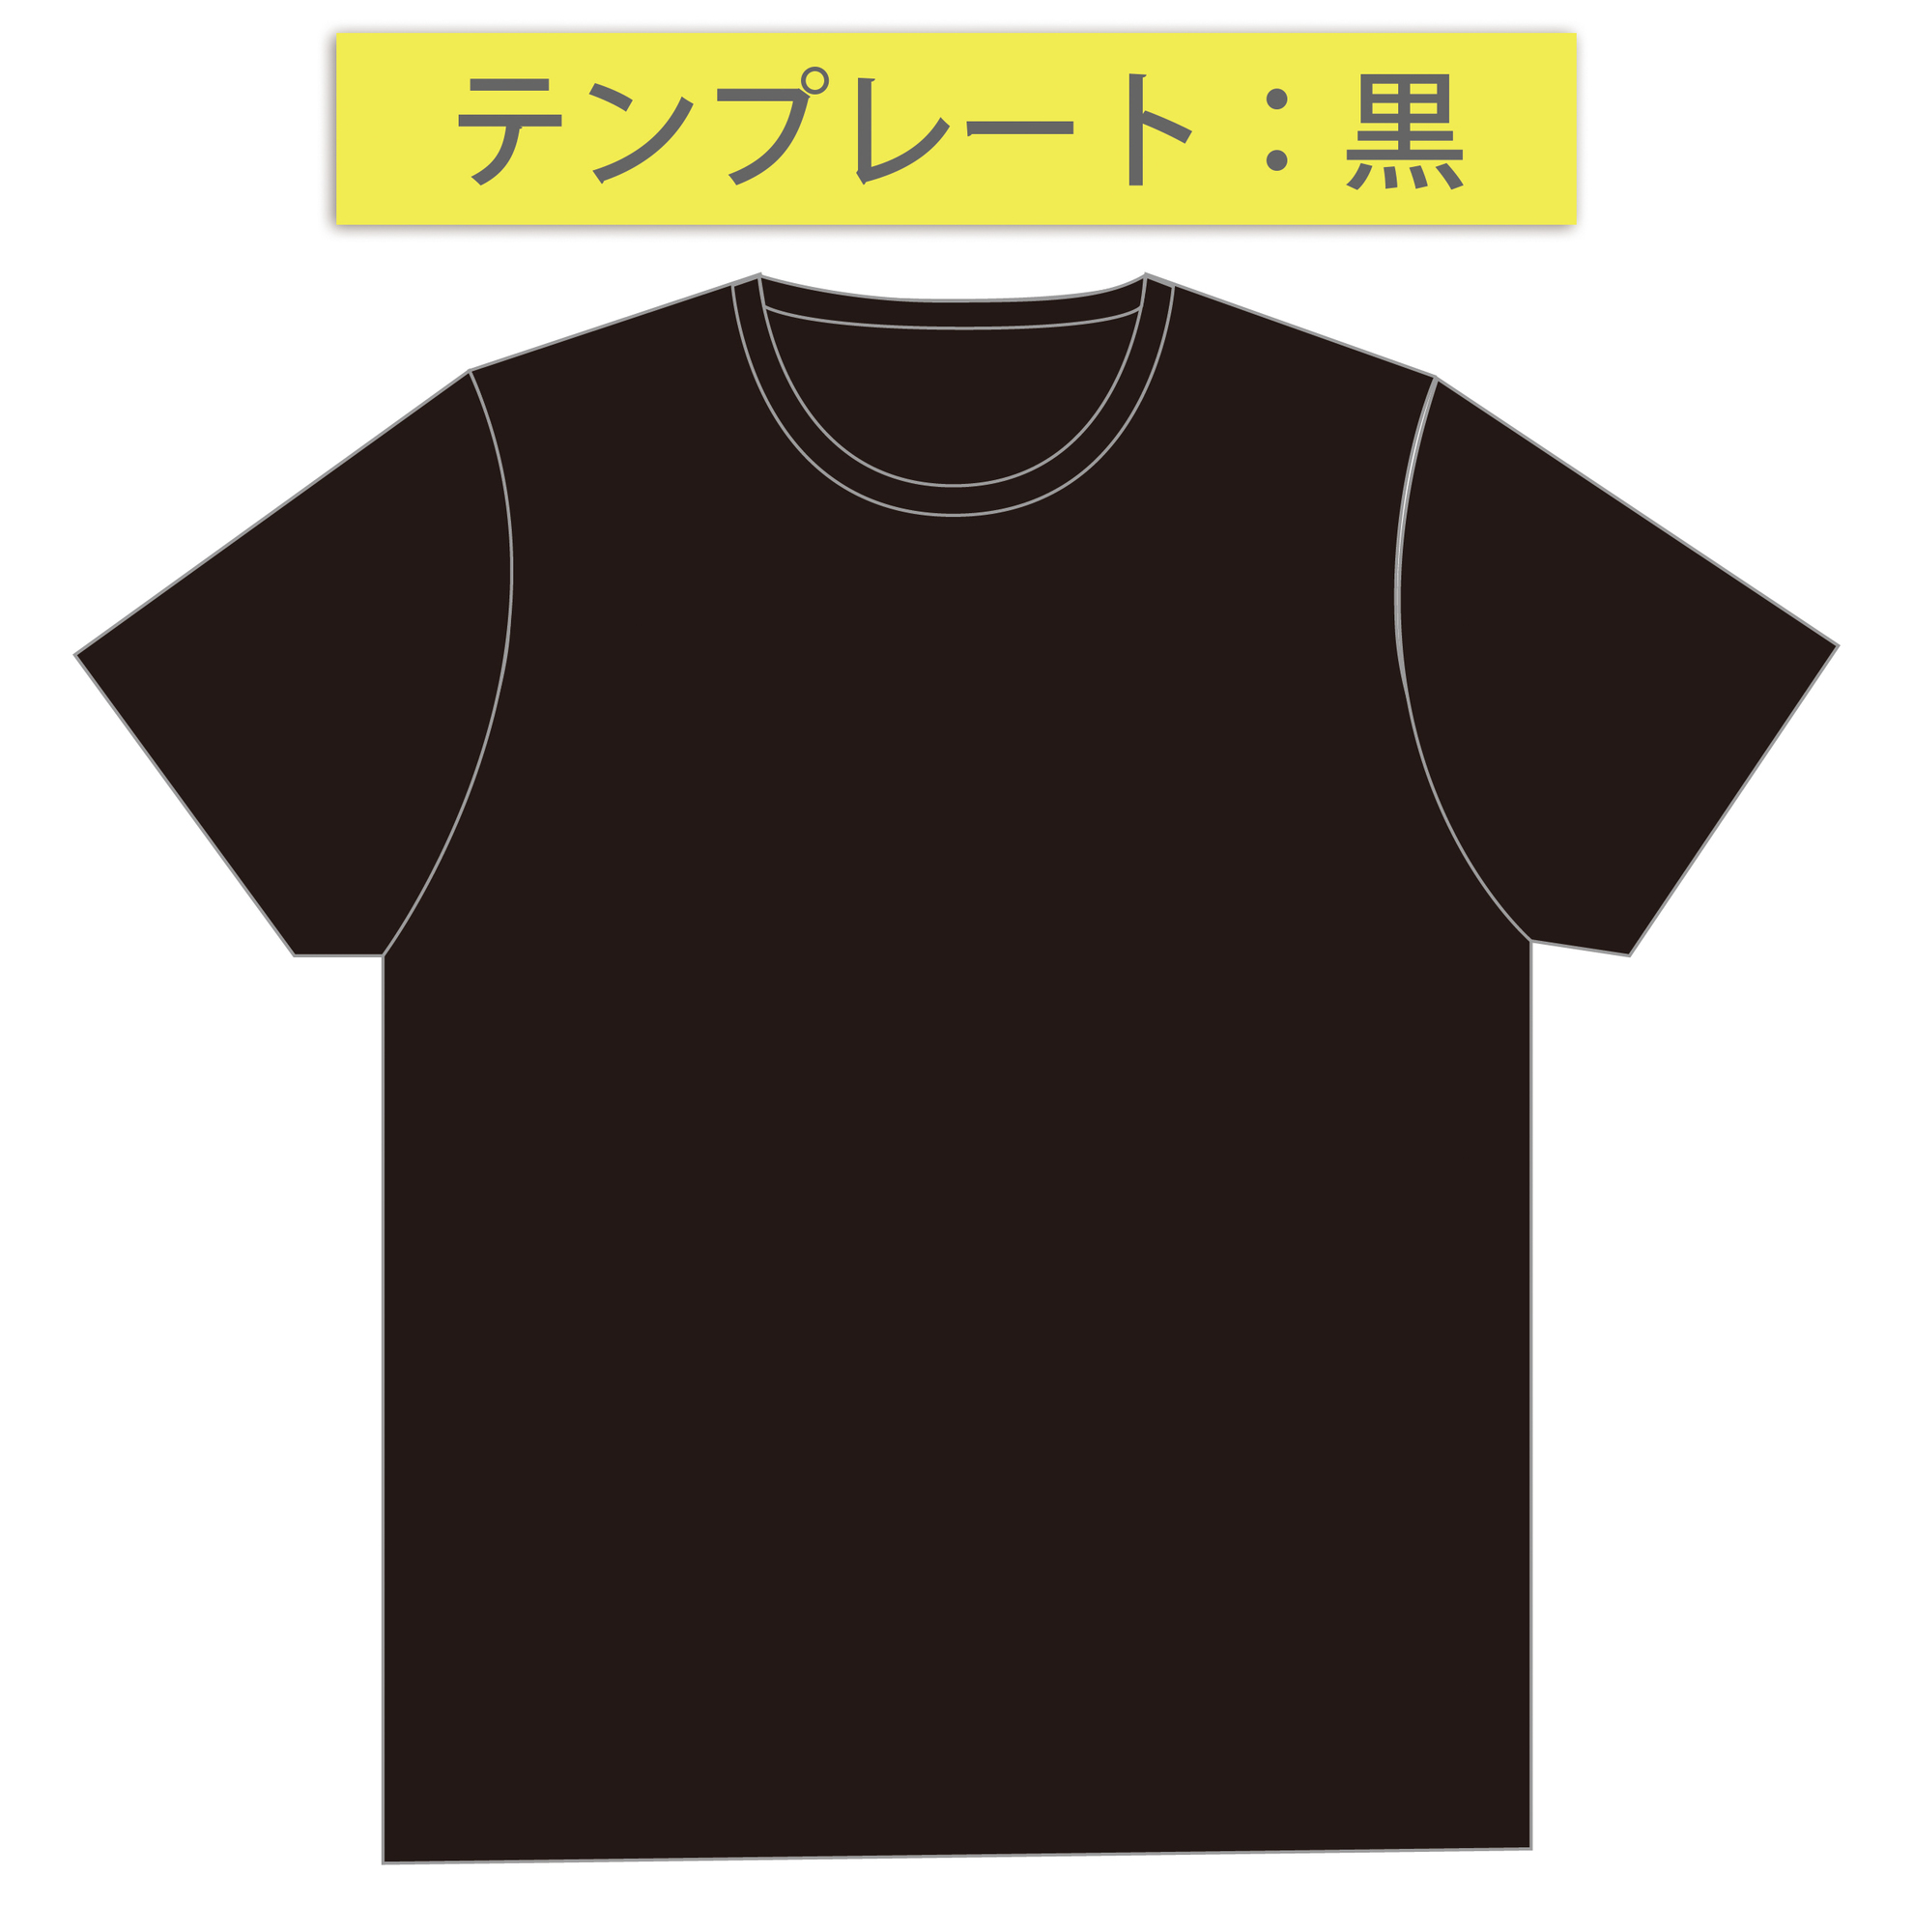 Lawson Presents Sphere Live Tour17 We Are Sphere ツアー連動企画 キャンペーン用 Tシャツデザイン募集 Sphere Portal Square スフィアポータルスクエア